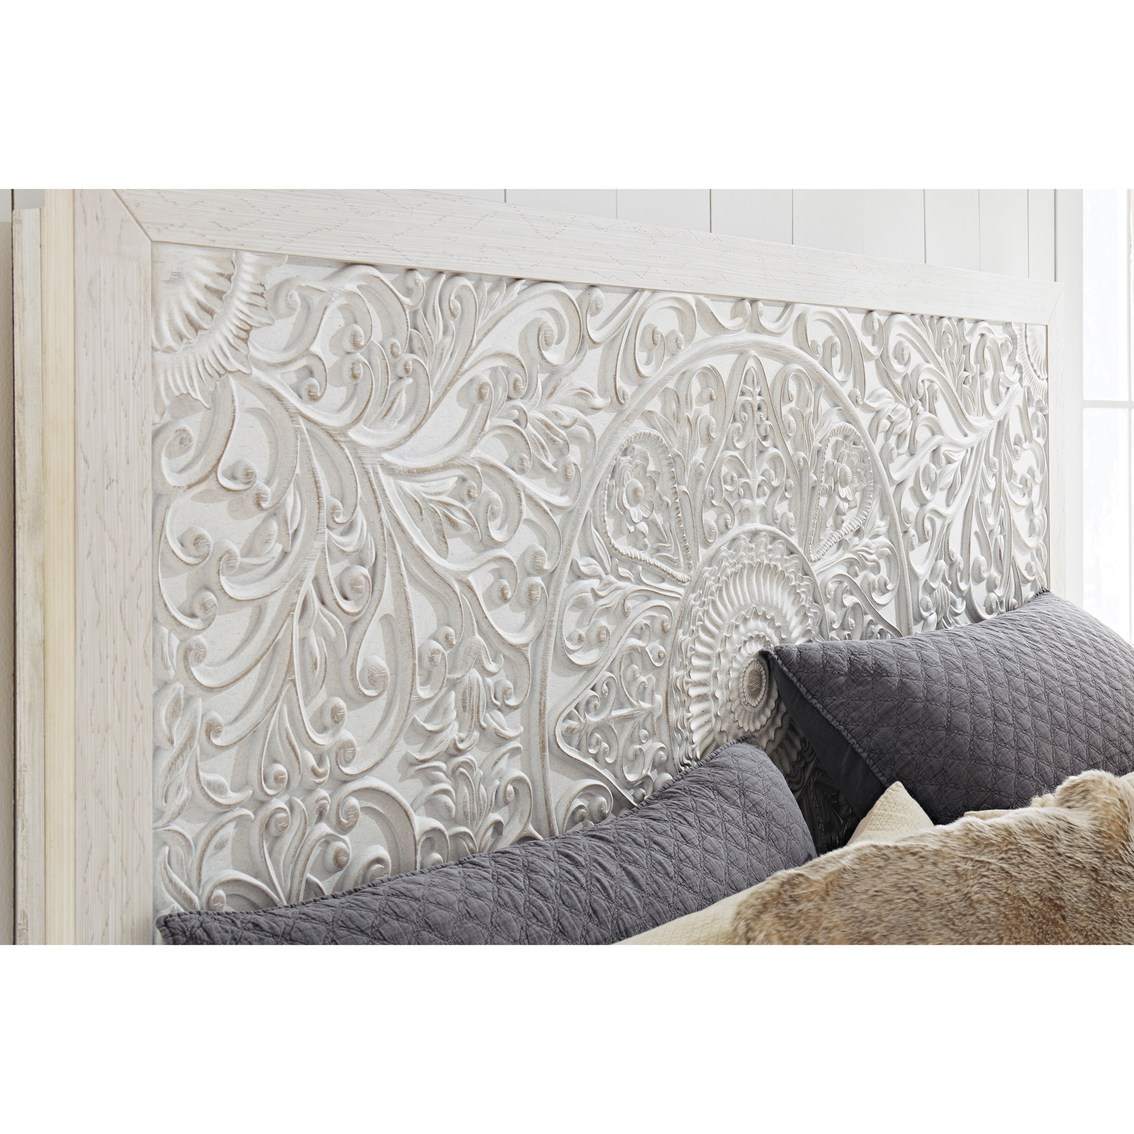 Signature Design by Ashley Paxberry Panel Bed - Image 5 of 5